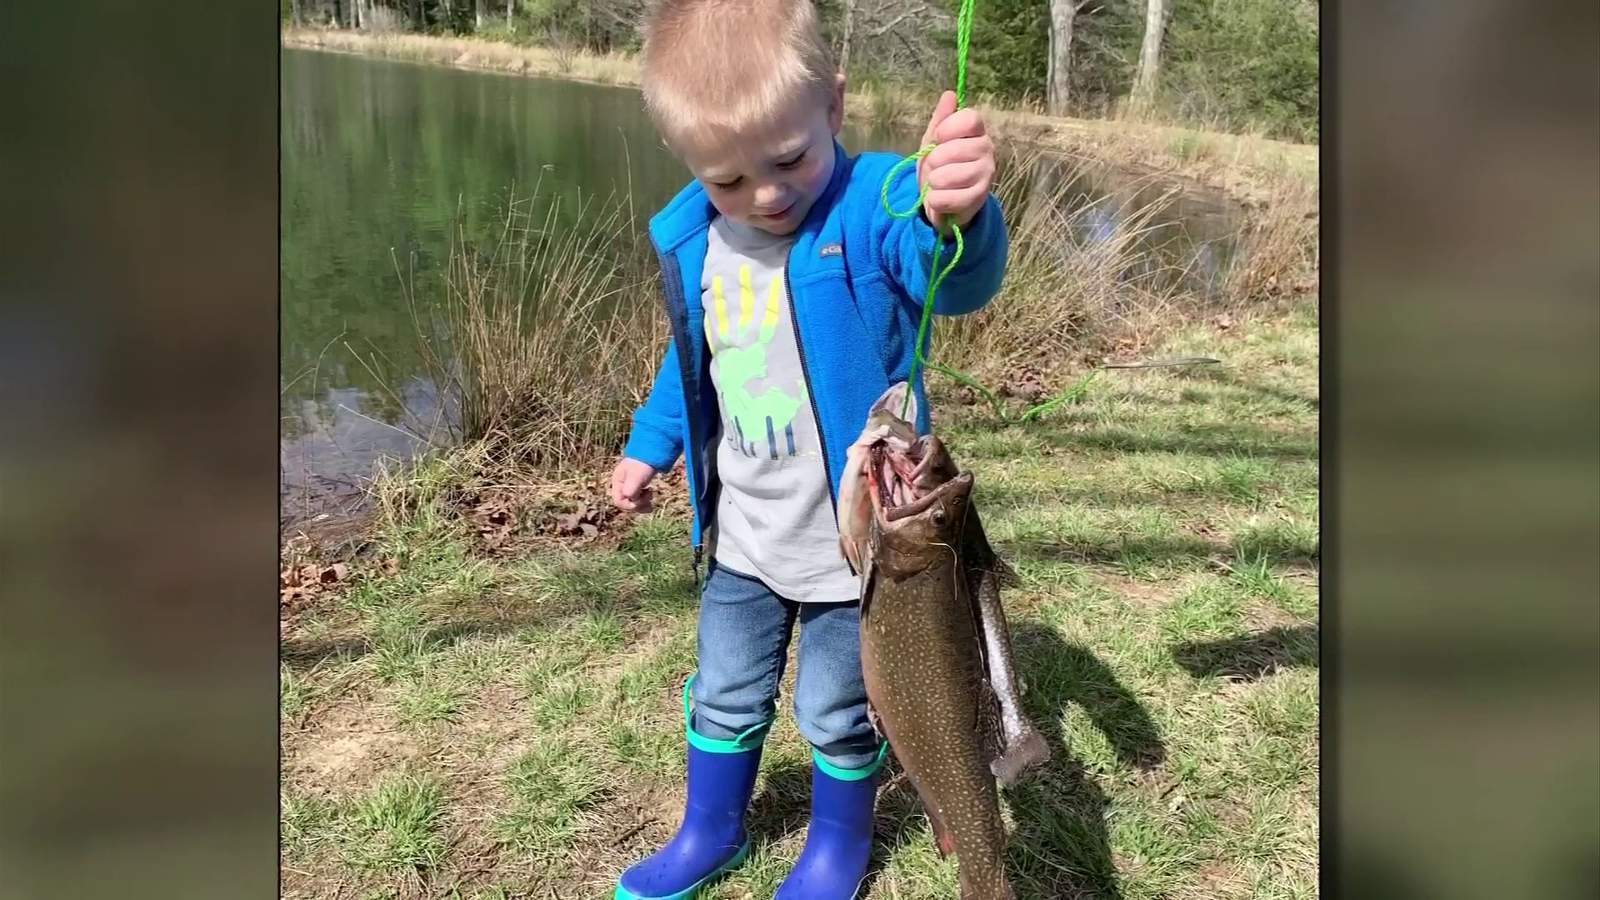 Cute video shows Giles Co. boy catching his first fish - “It’s a big one!”